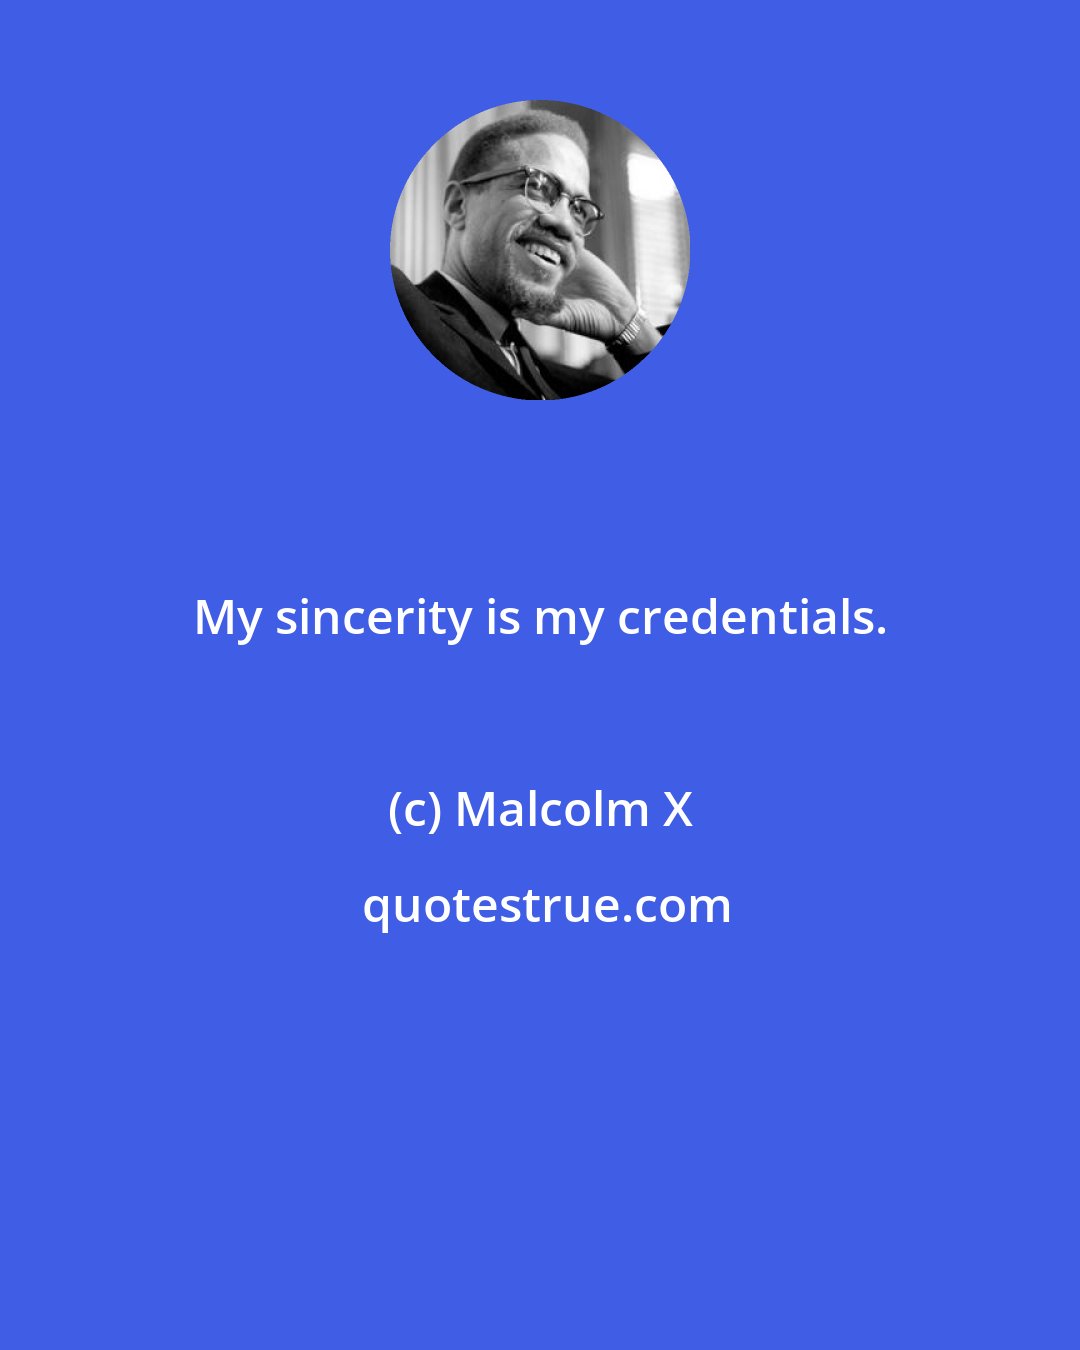 Malcolm X: My sincerity is my credentials.